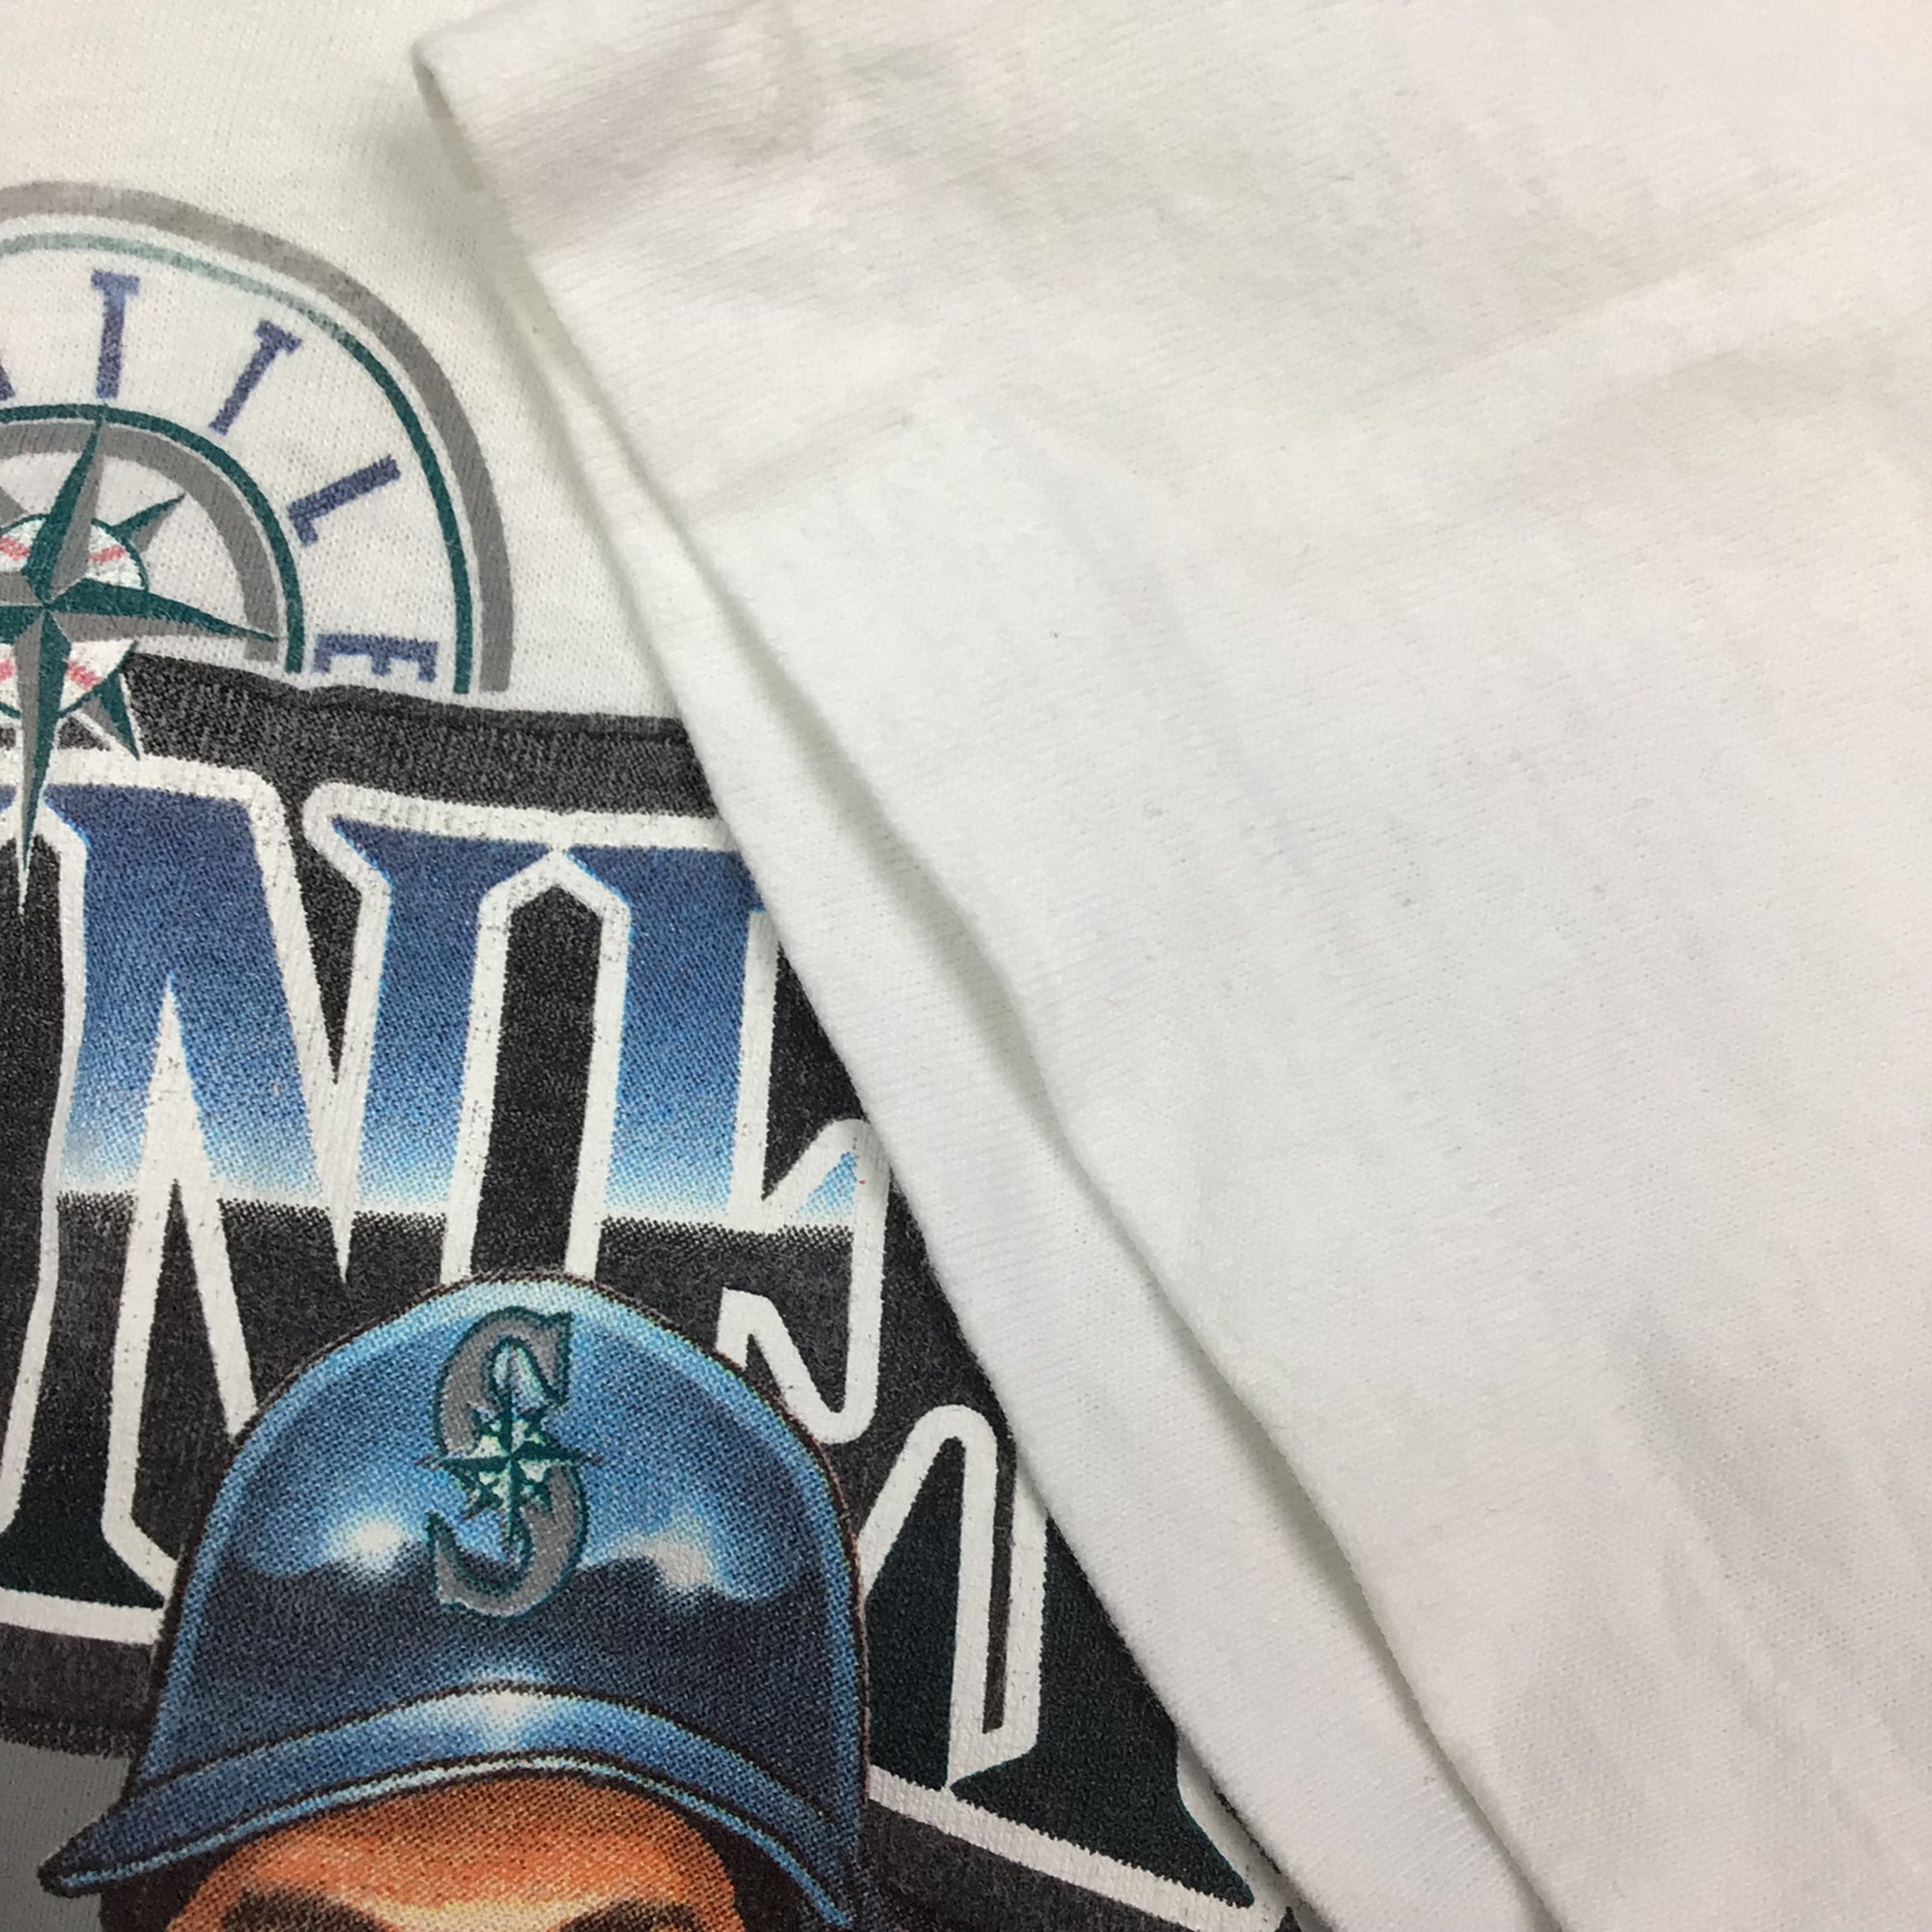 VINTAGE 1995 Seattle Mariners Playoff T-Shirt, Clean